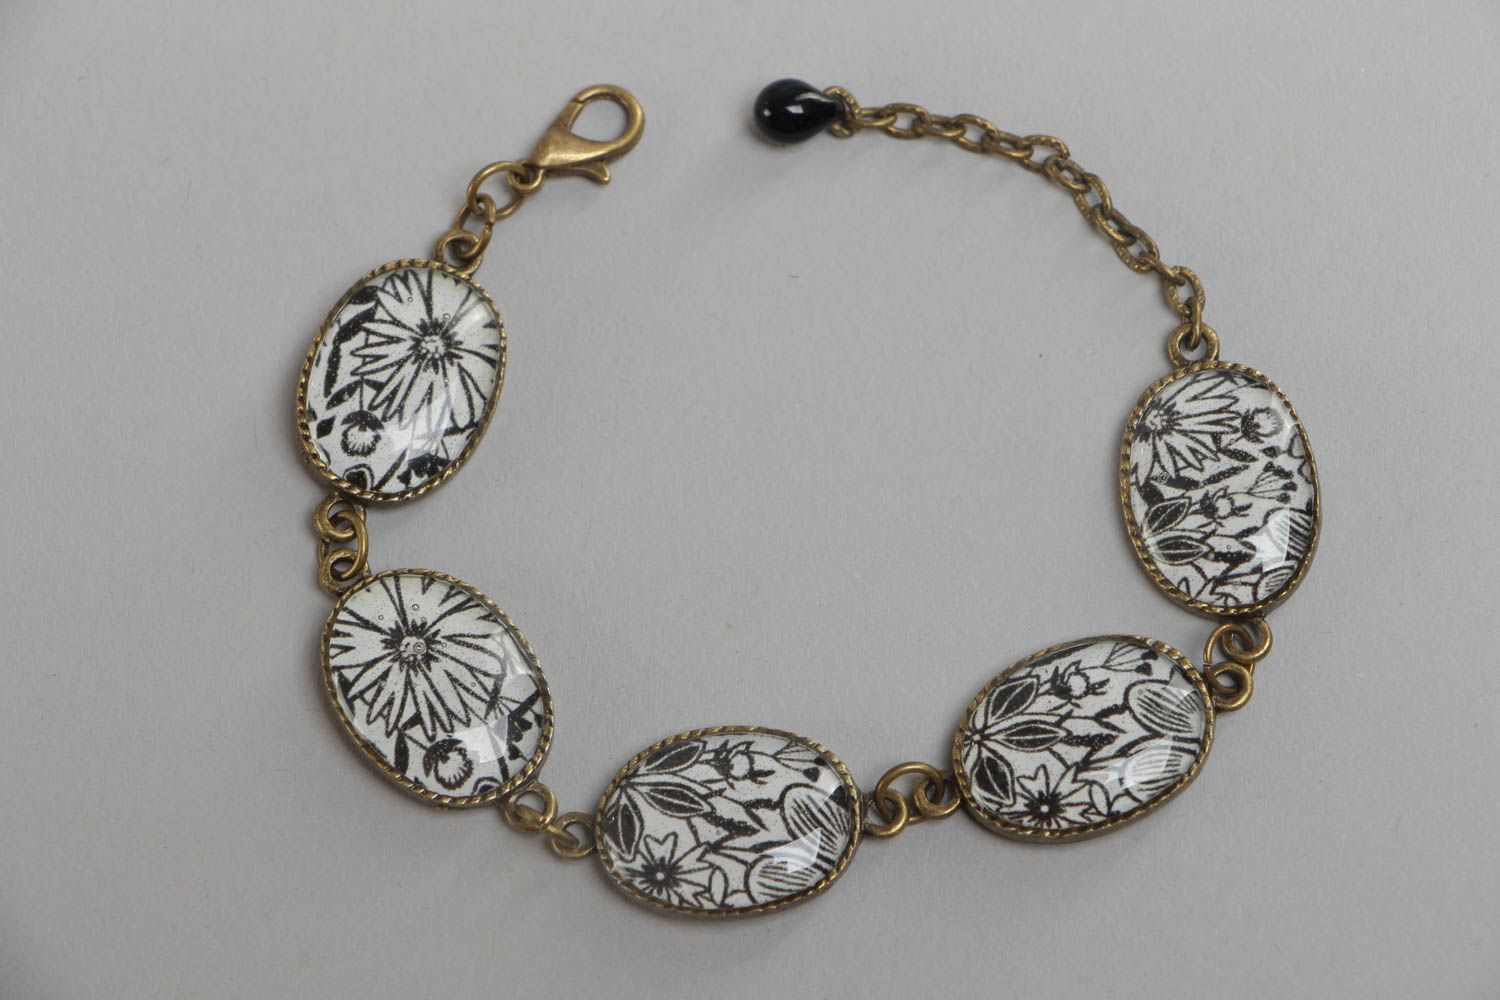 Handmade metal chain wrist bracelet with floral images coated with glass glaze photo 2